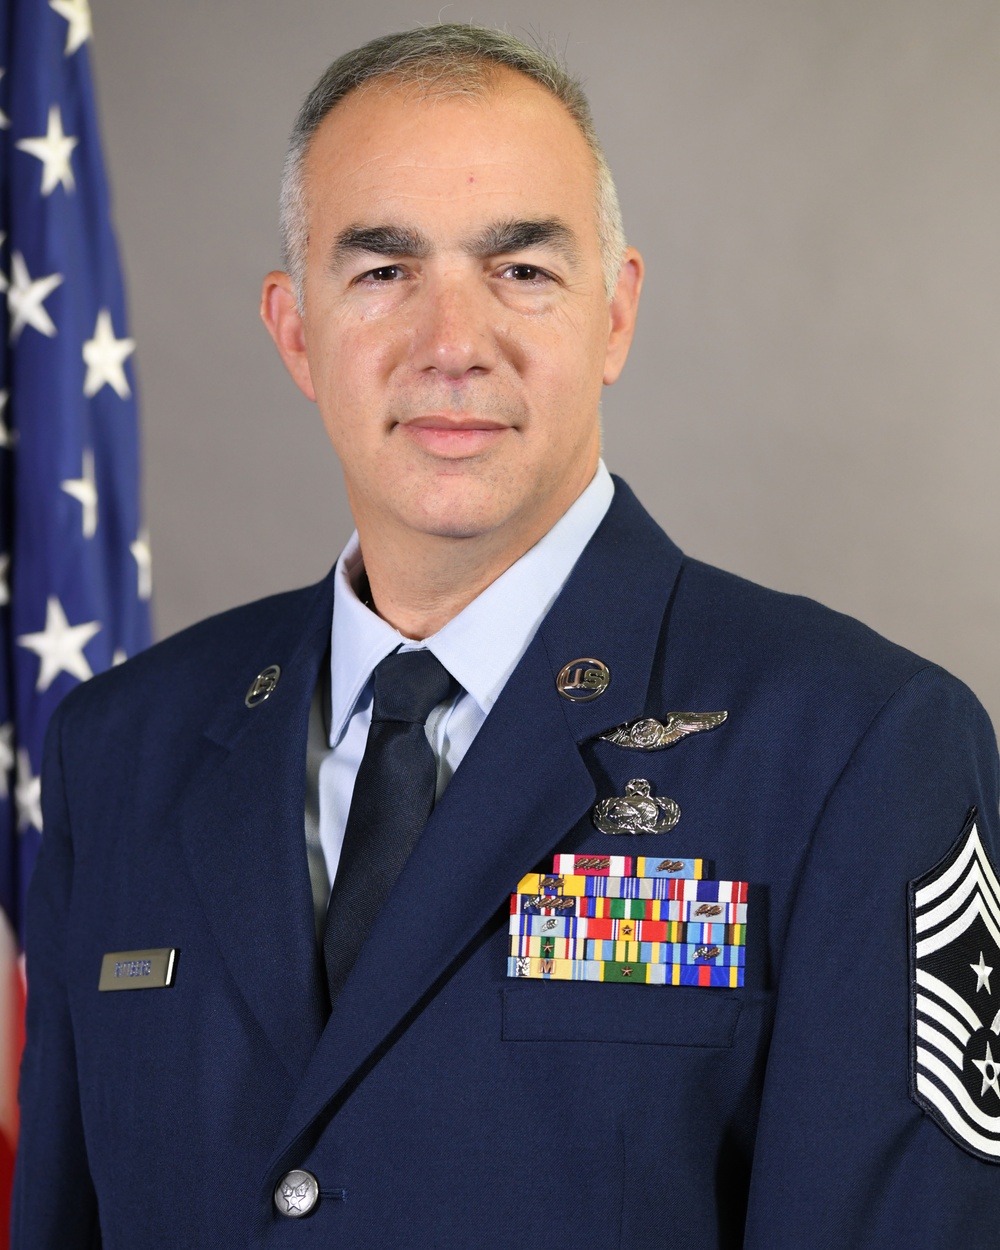 Command Chief Master Sgt. Edward Rittberg, a Mattituck resident appointed as regional representative to the Air National Guard’s Enlisted Field Advisory Council.